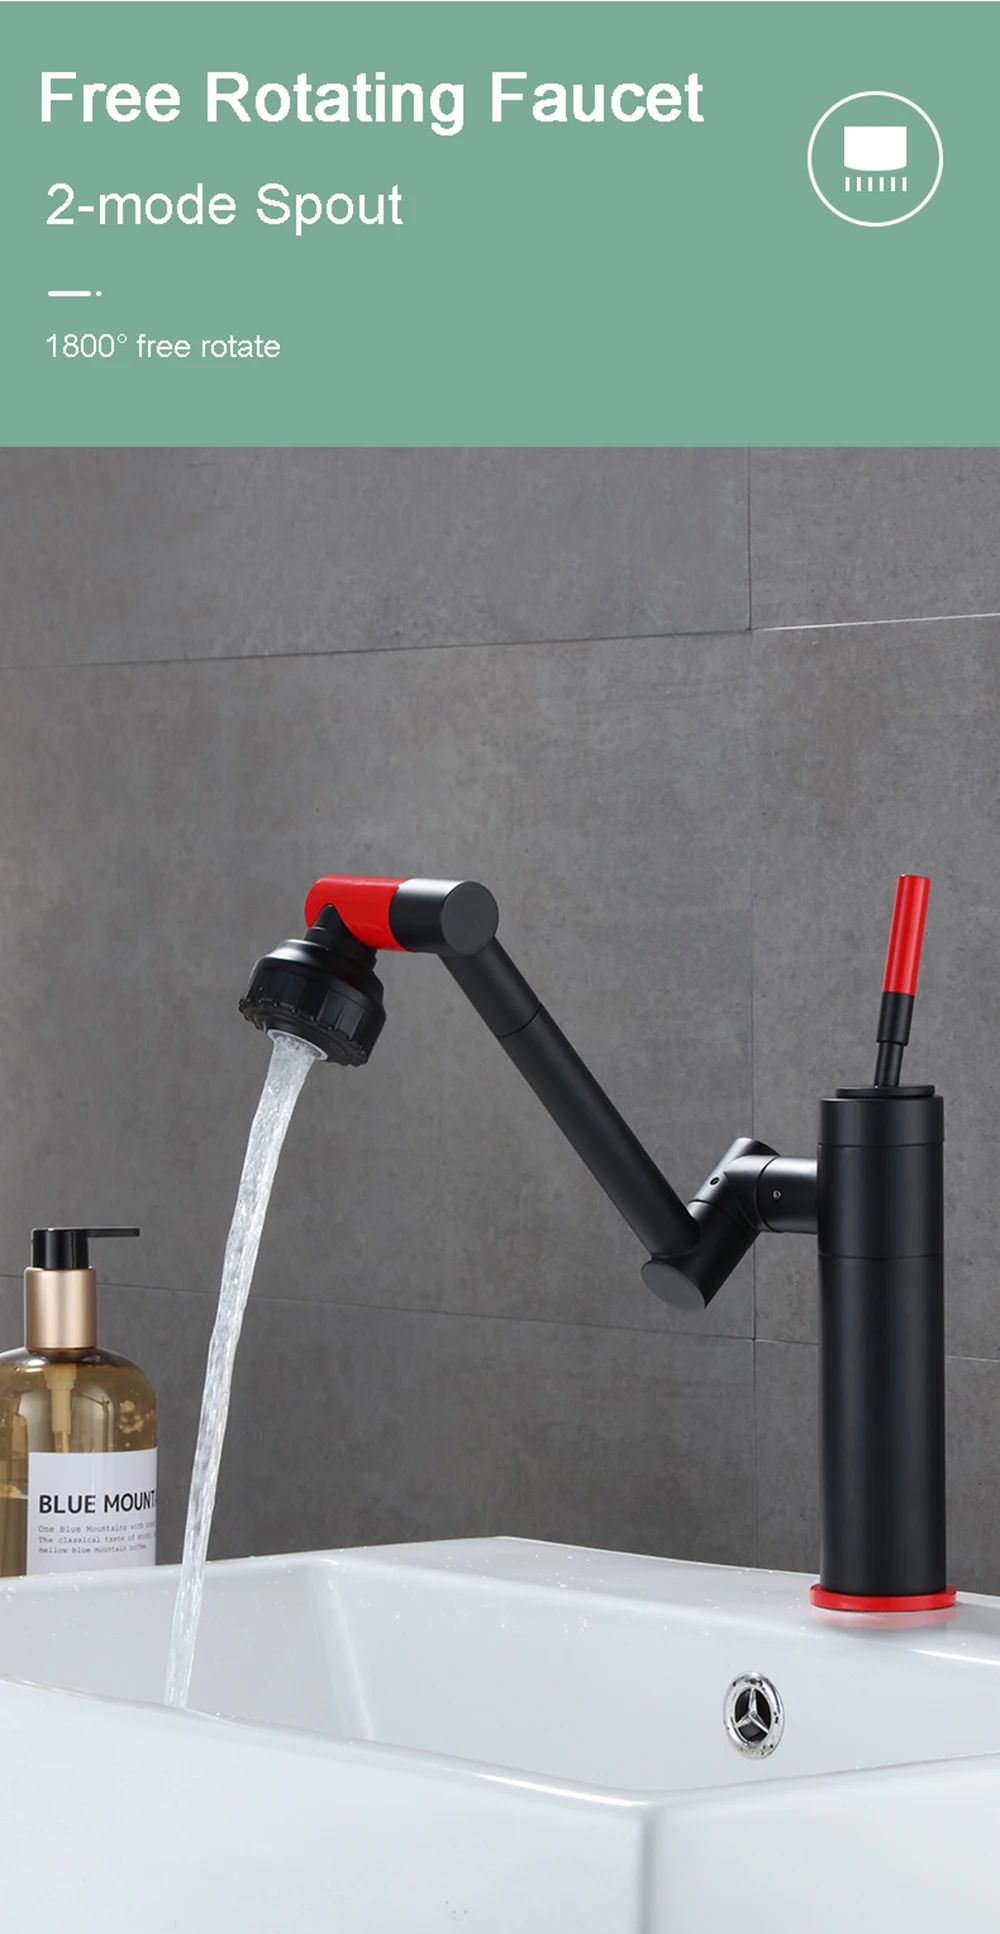 POIQIHY Black 360 Degree Rotate Kitchen Faucet Pull Out Sprayer Gun Dual Mode Spout Bathroom Kitchen Mixer Tap Foldable Faucet